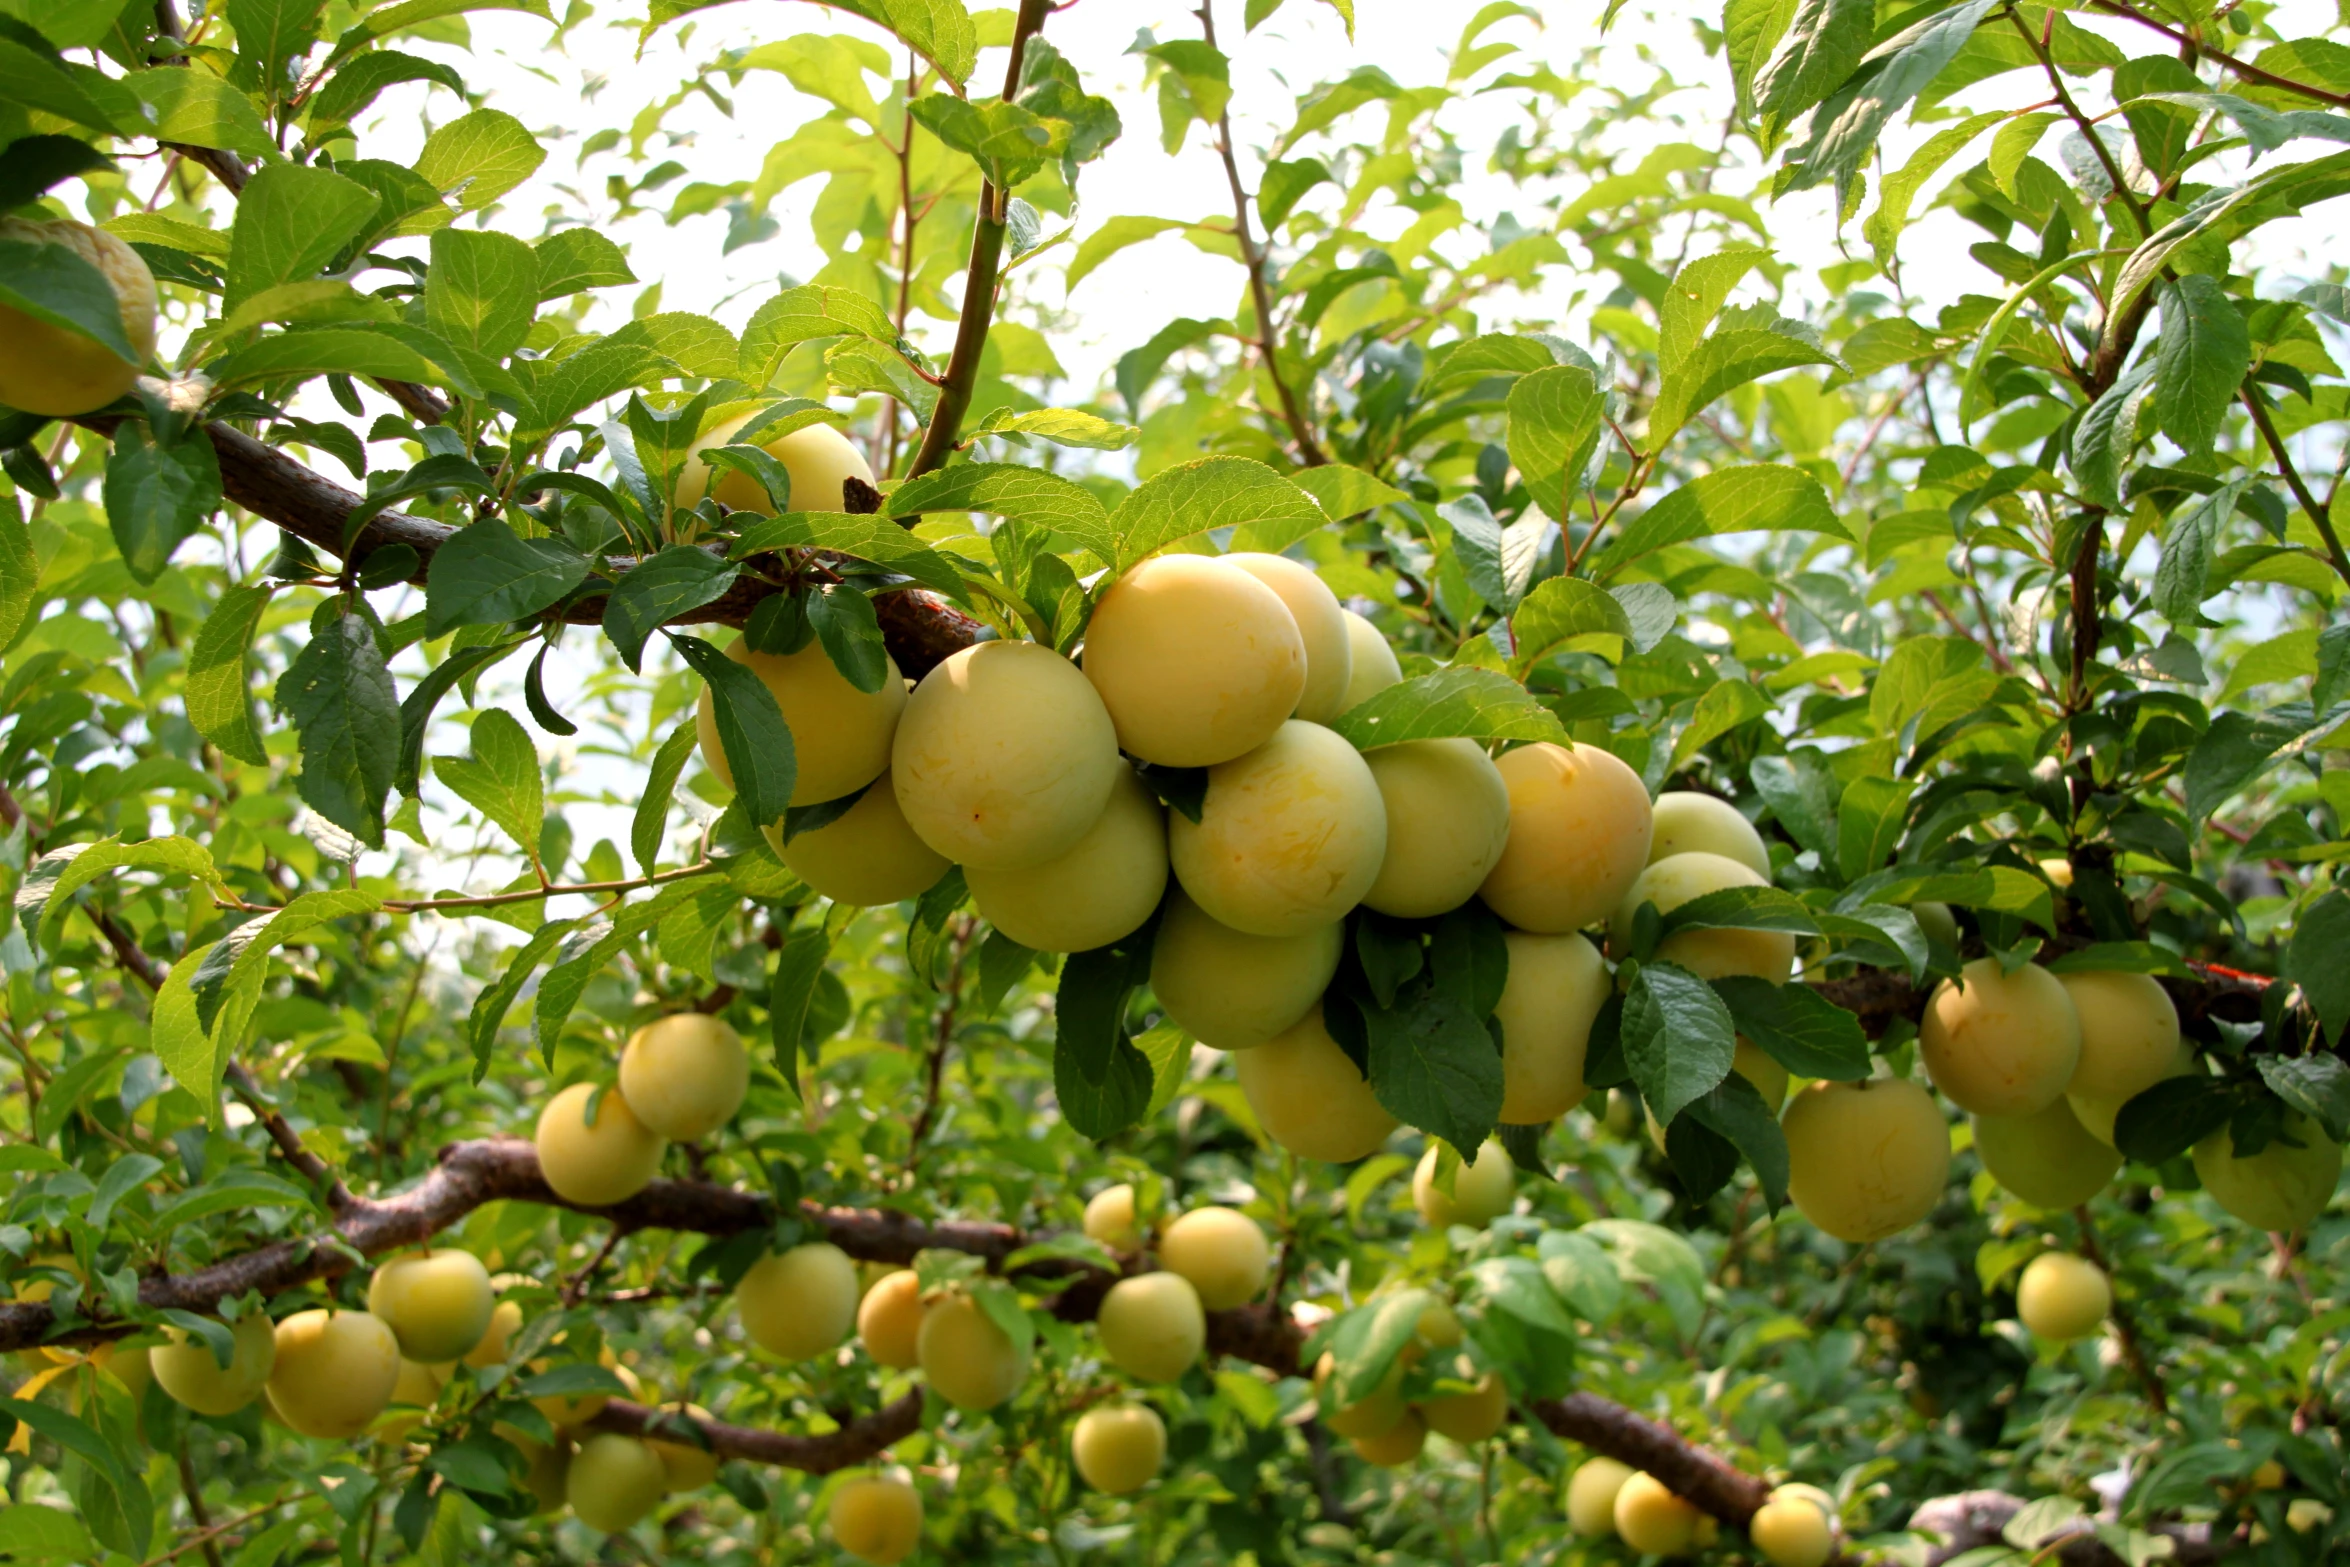 some fruit is hanging from the tree, some yellow